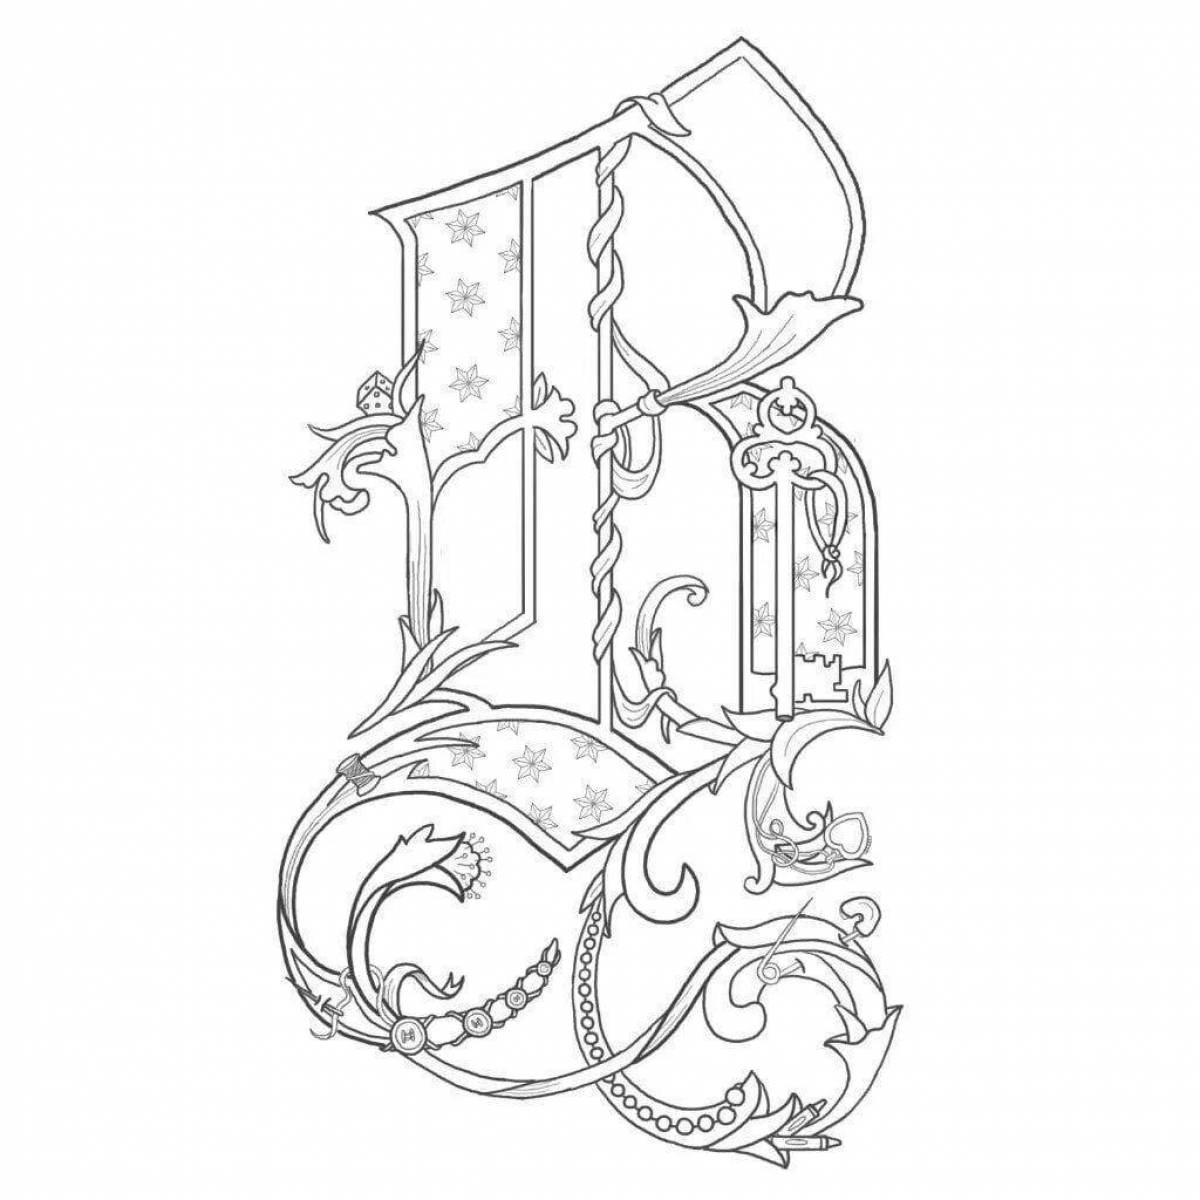 Exciting coloring page initial letter